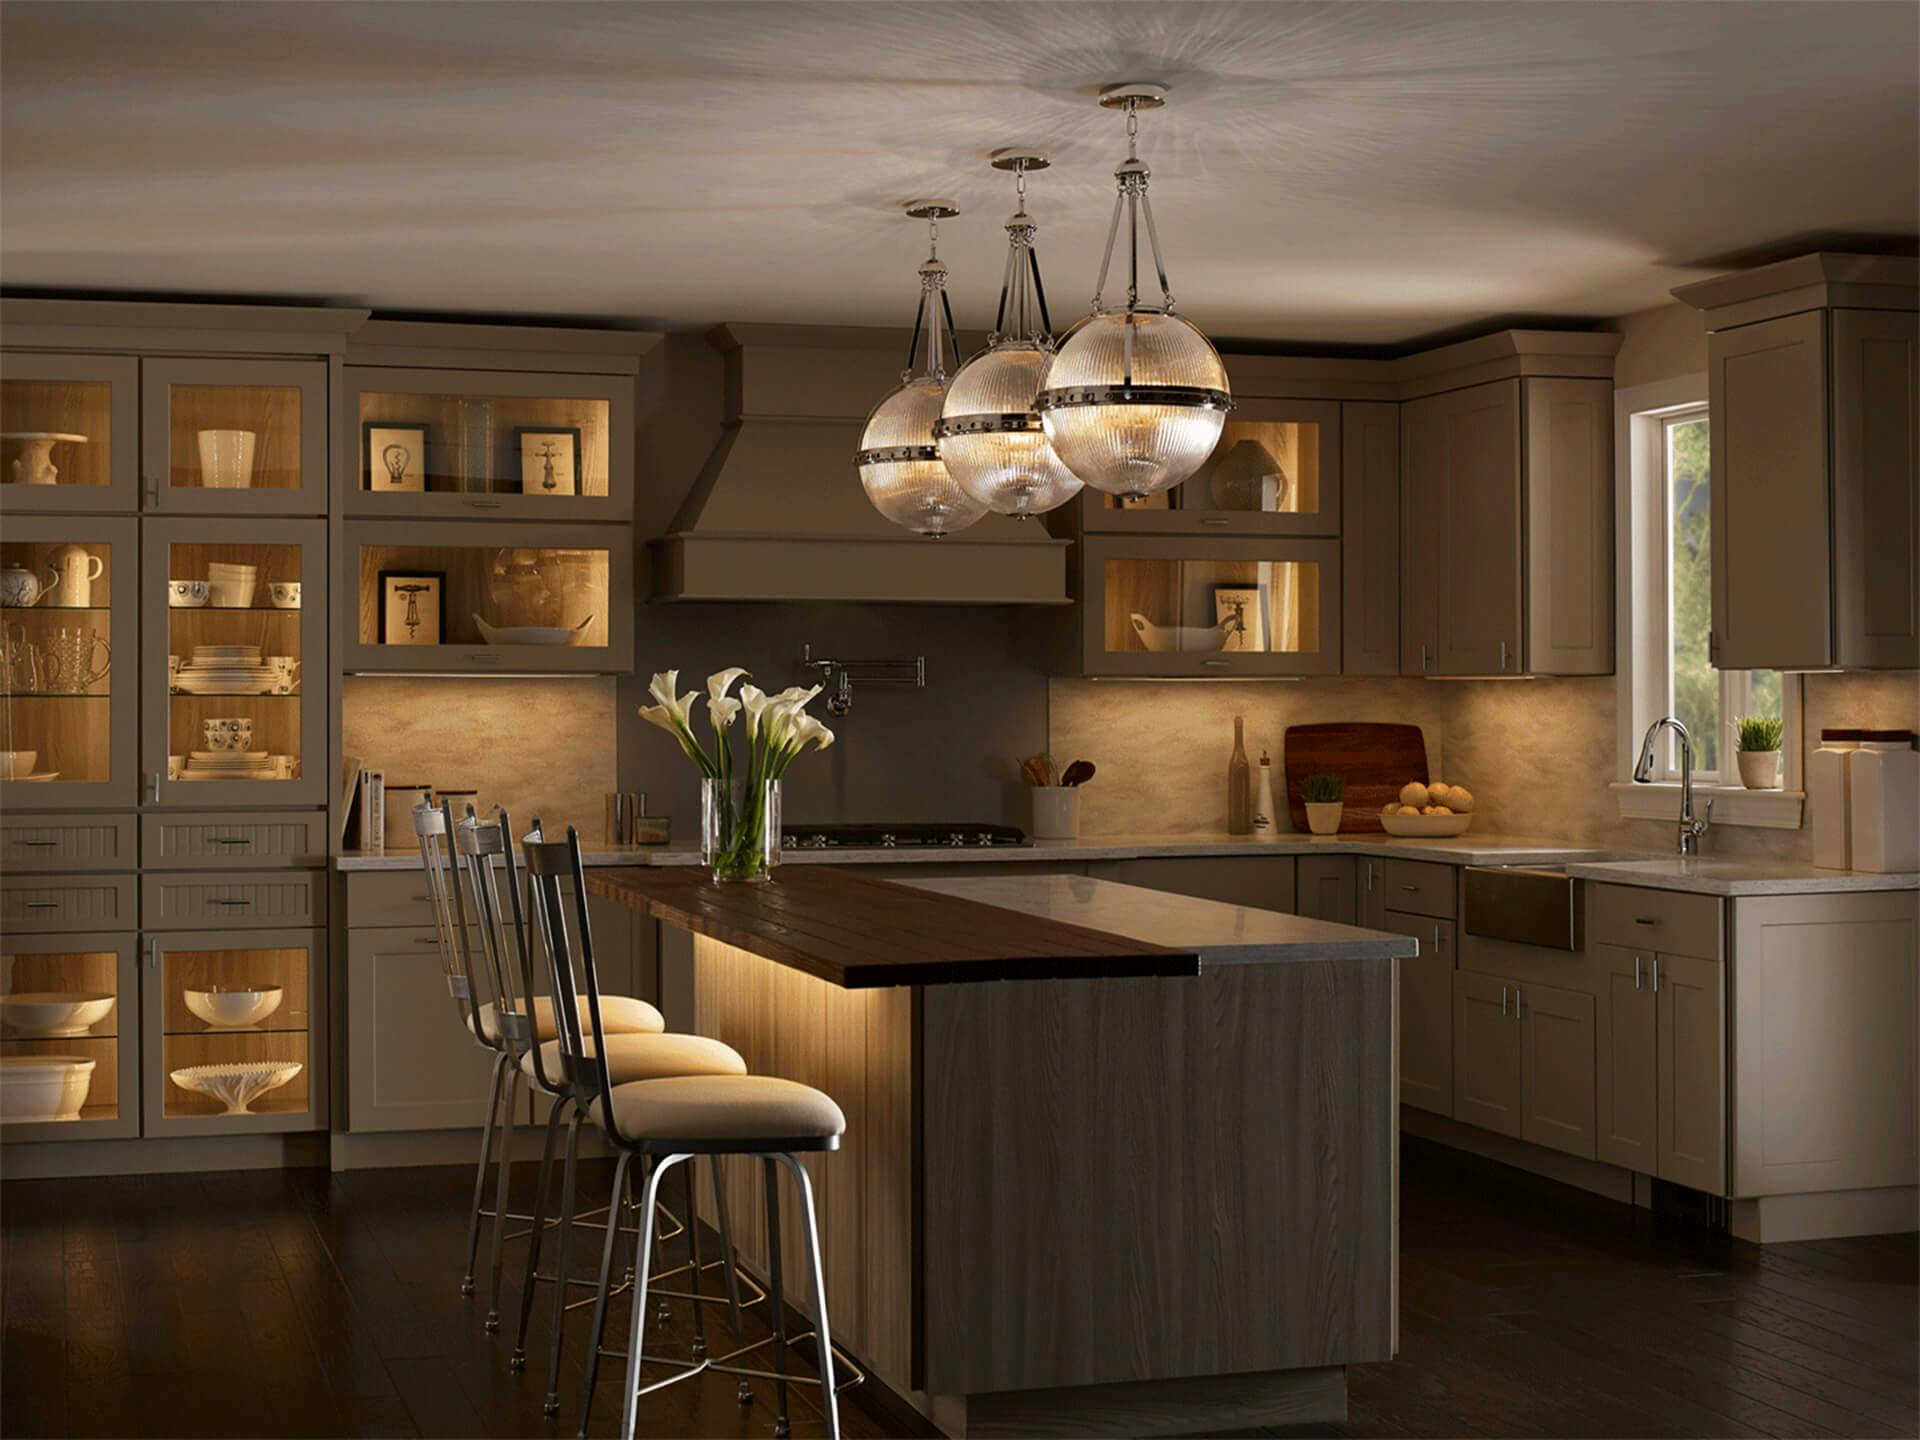 Dark scene of a kitchen with three Aster pendants hanging above the island and 6U Series LED Under Cabinet Lighting illuminating nearby chairs